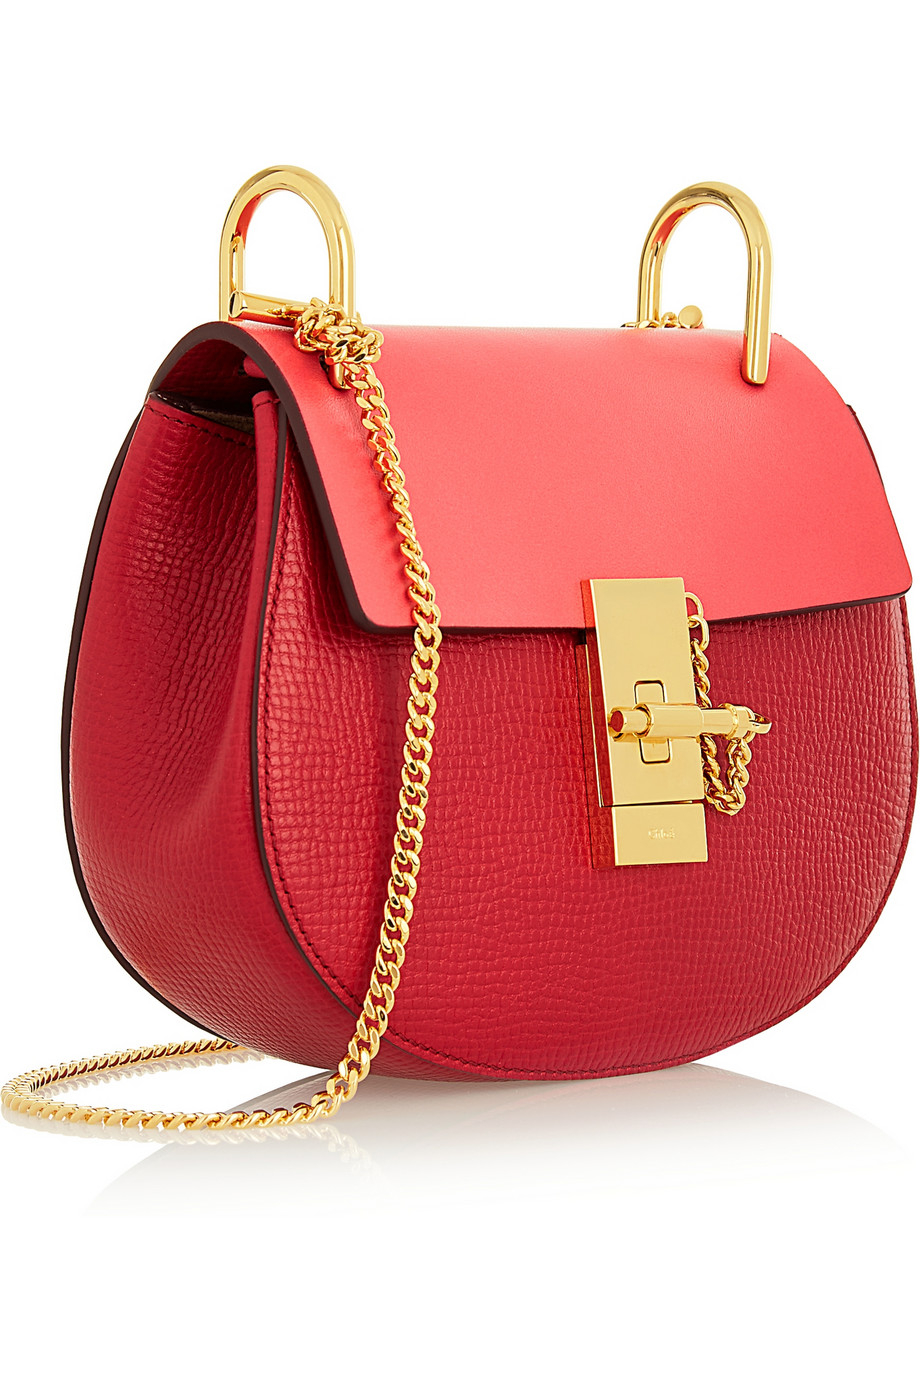 Chlo Drew Mini Textured-Leather Shoulder Bag in Pink | Lyst